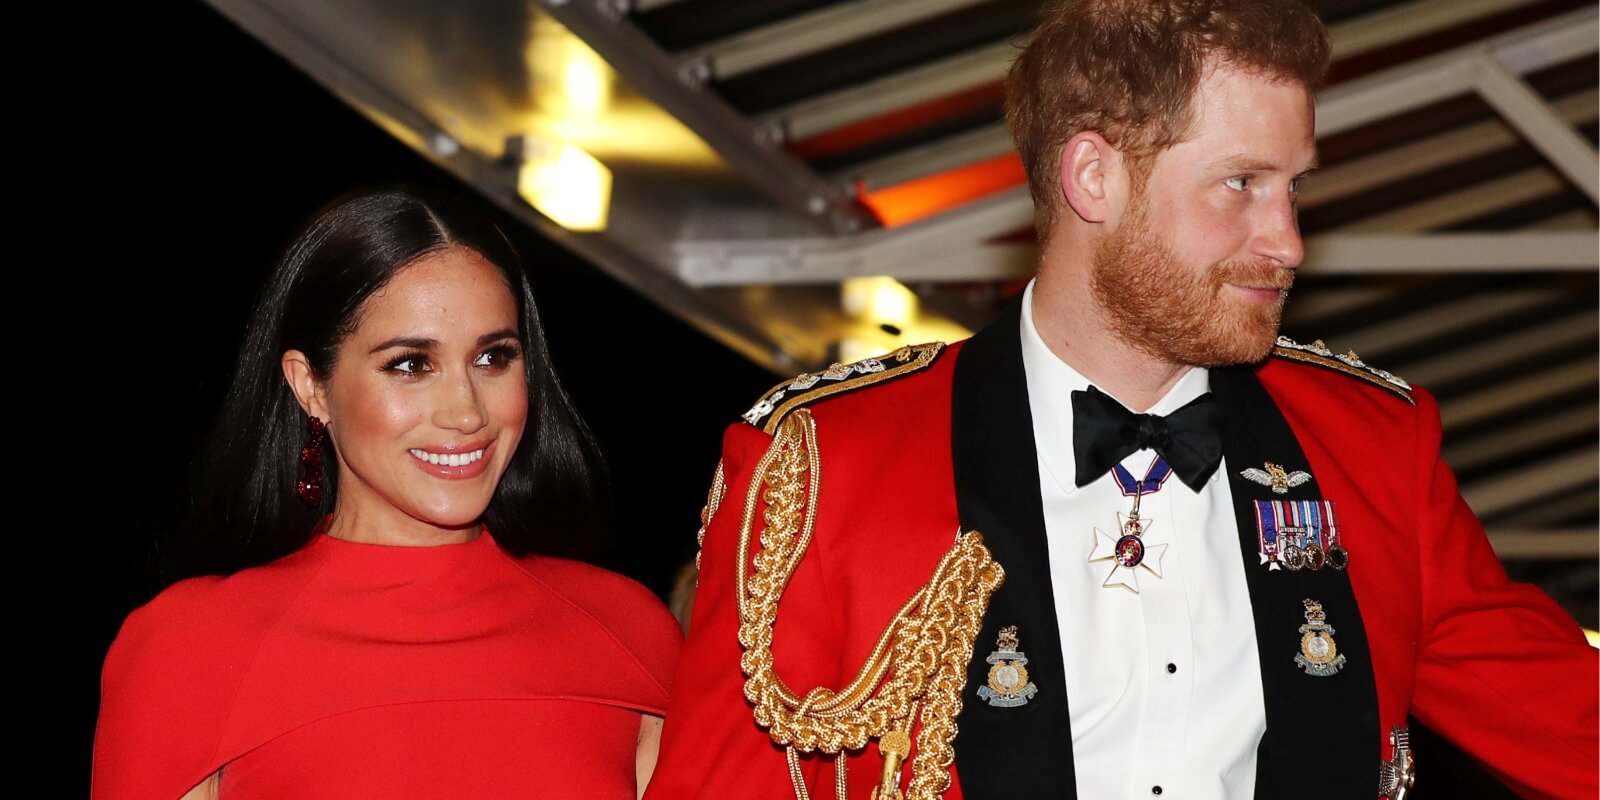 Meghan Markle and Prince Harry at one of their last functions as senior royals in March 2020.